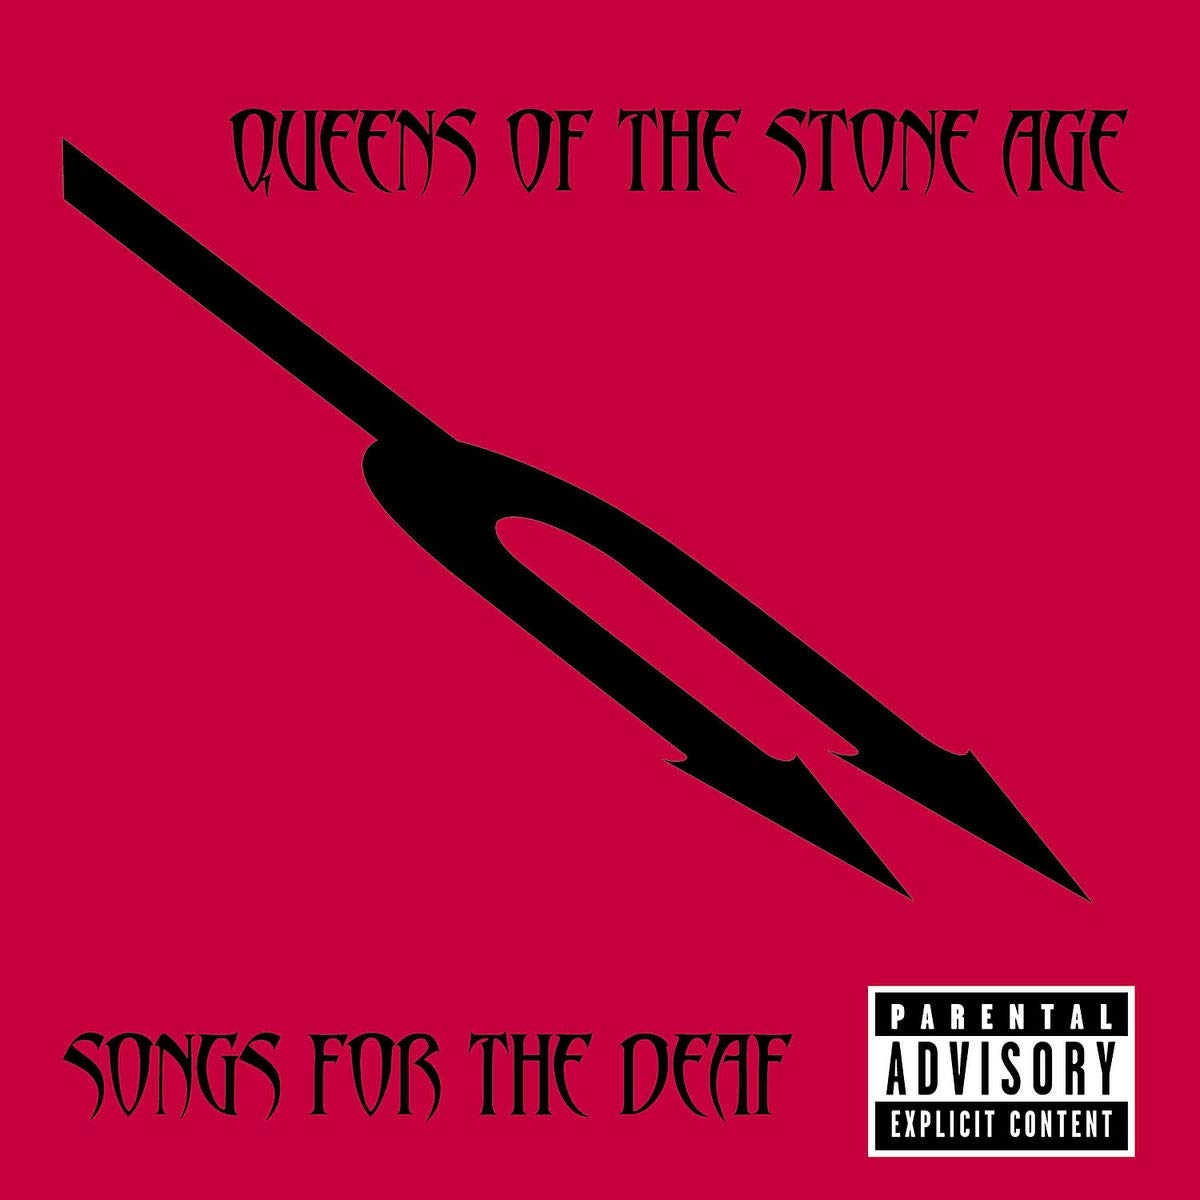 CD Shop - QUEENS OF THE STONE AGE SONGS FOR THE DEAF